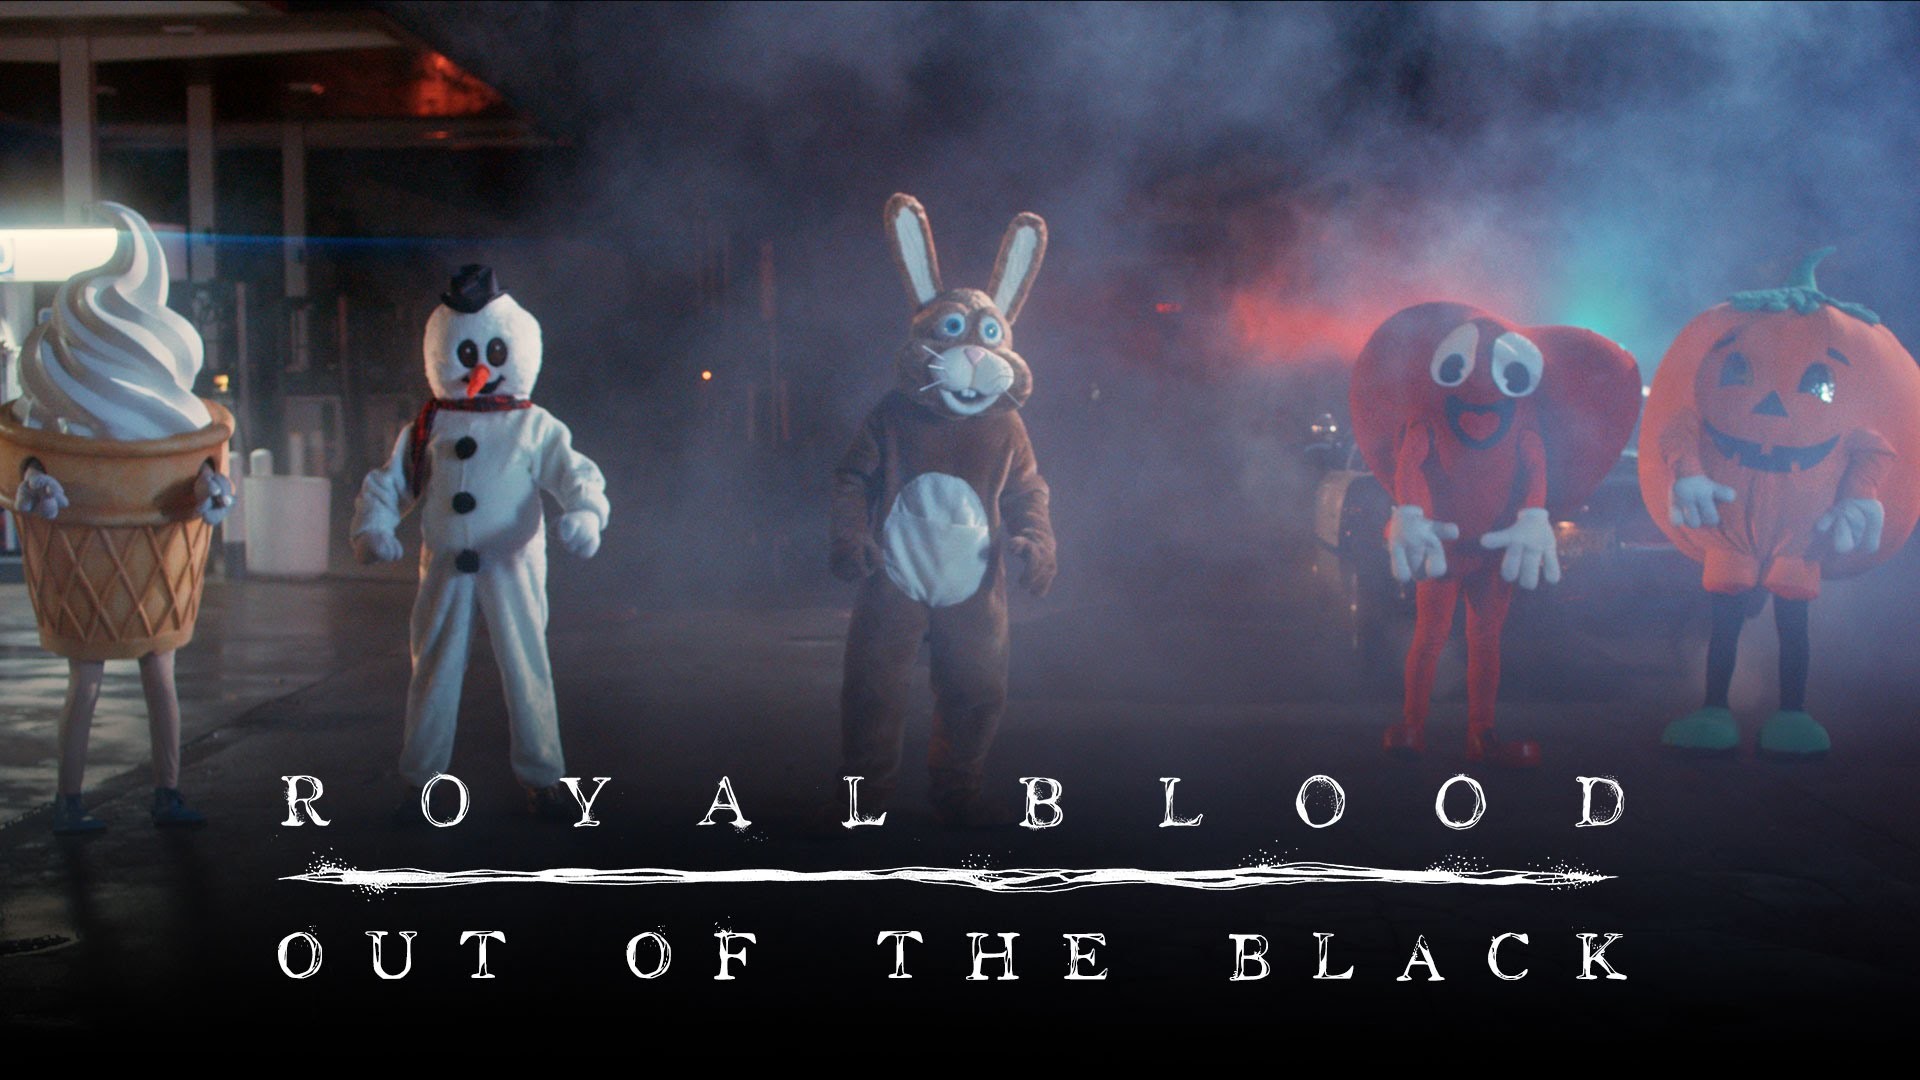 1920x1080 Royal Blood release new music video for 'Out of The Black'